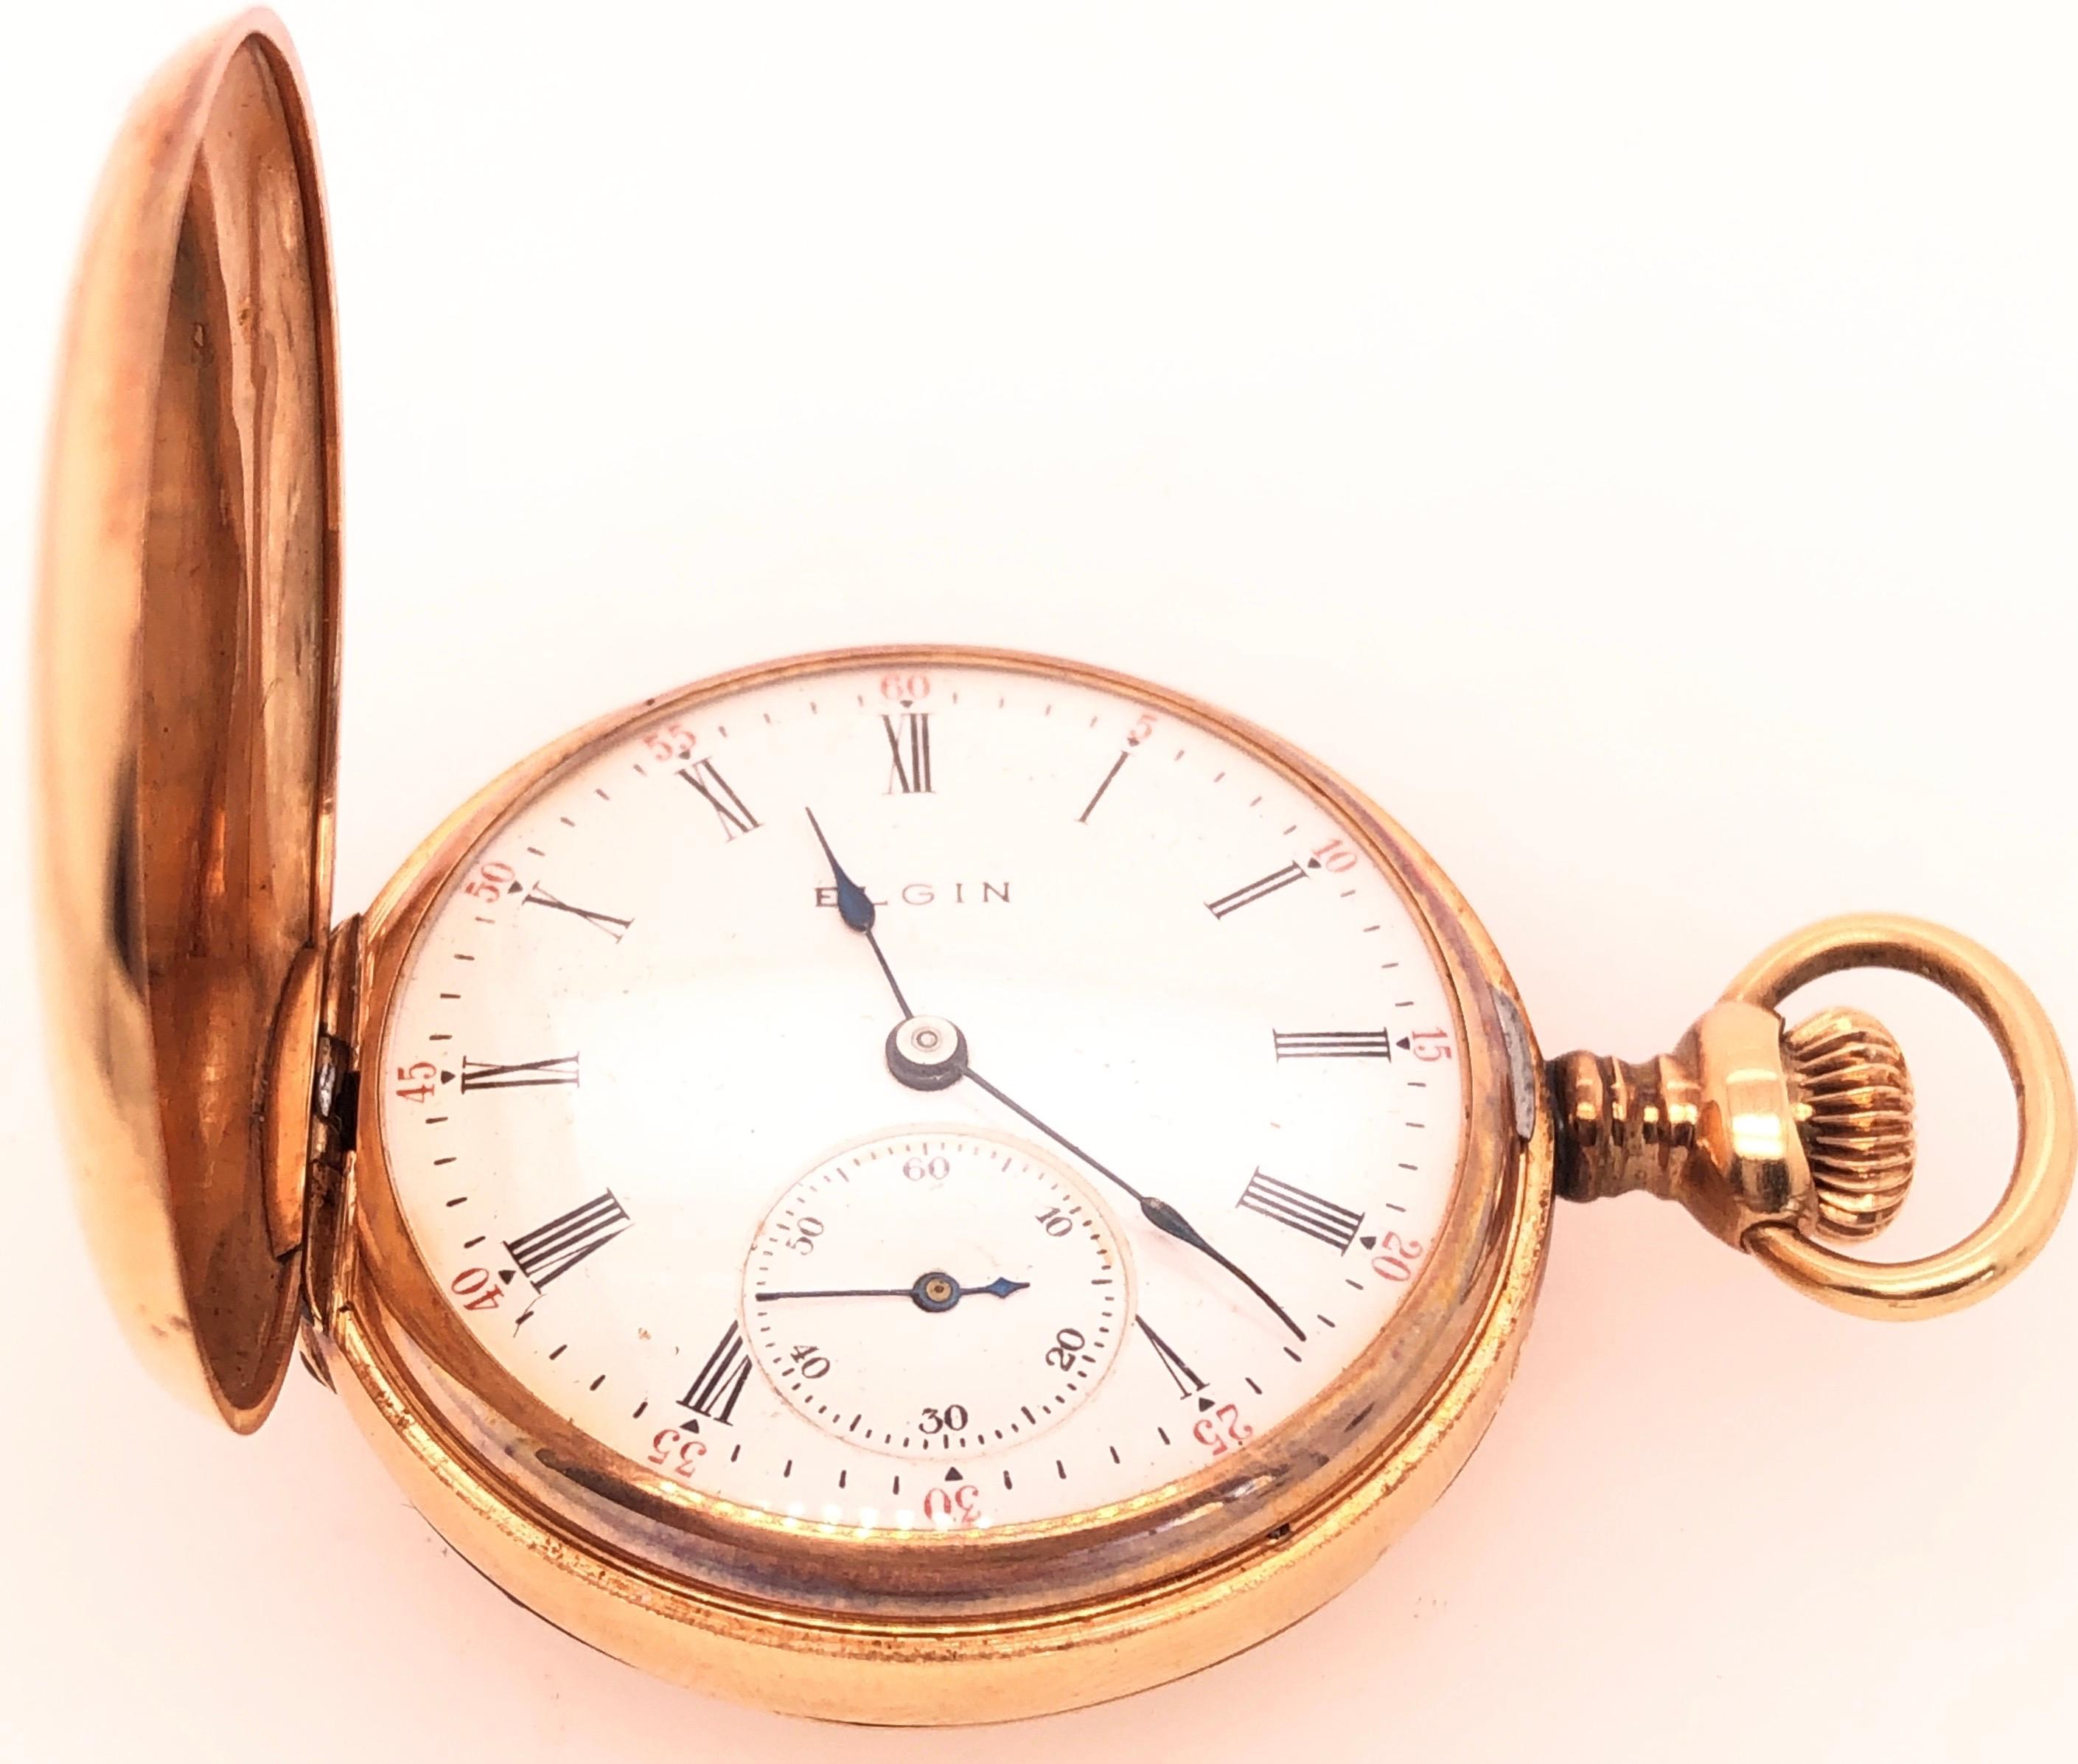 This beautiful antique Elgin pocket watch circa 1895 is a true collectible. The hunting case has an inner dust cover and is set with a beautiful round diamond. It is 32 mm diameter, case no.836602 movement no. 11289658. This watch is in fine working